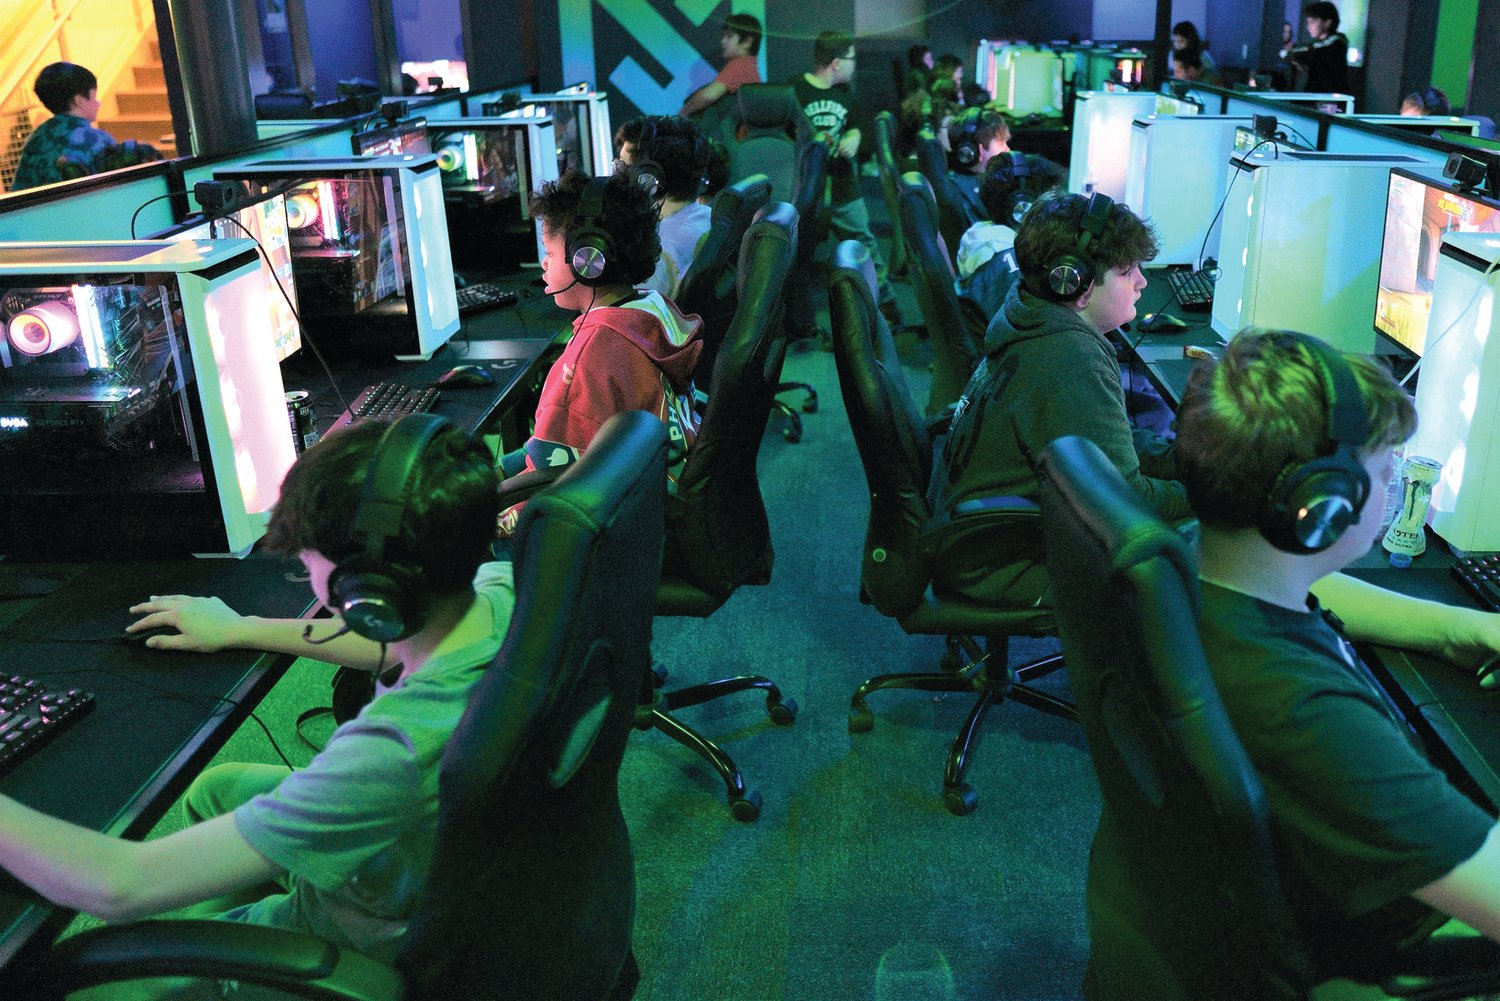 Gamers compete in tournament play at the Metro Esports gaming lounge at the Doylestown branch of YMCA of Bucks and Hunterdon Counties.